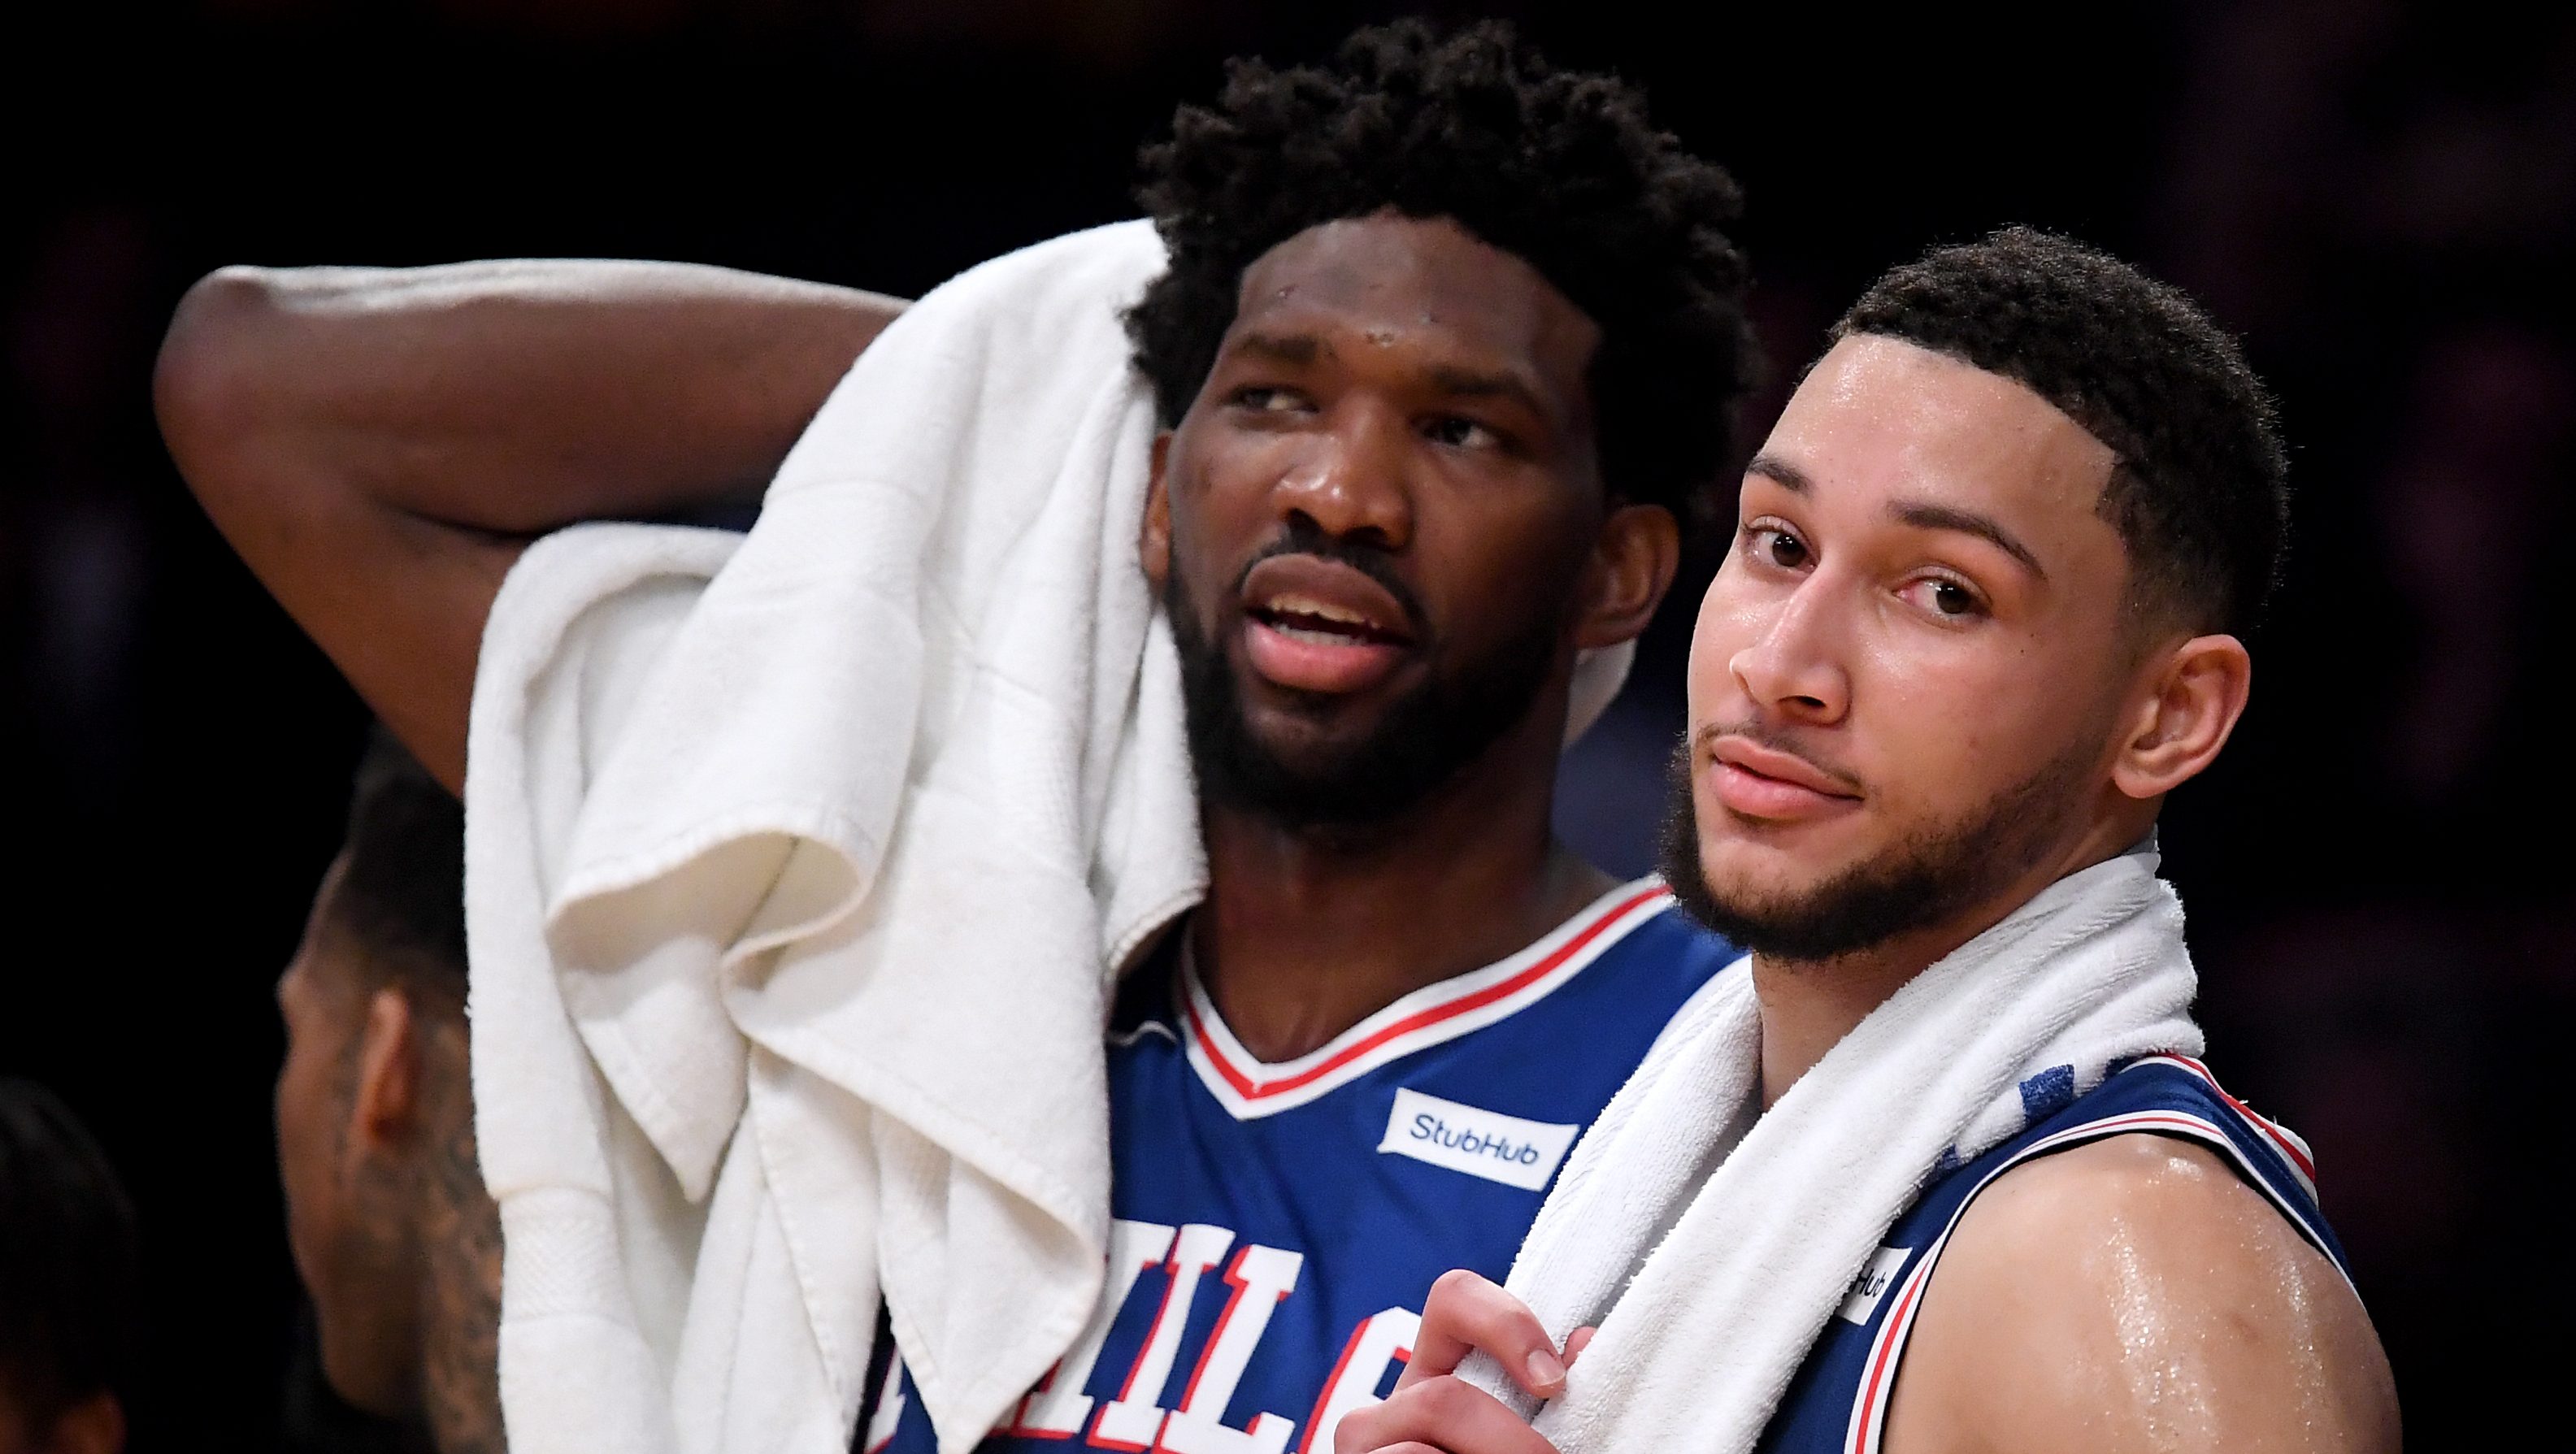 LeBron James told Ben Simmons he has 'opportunity to be better than me